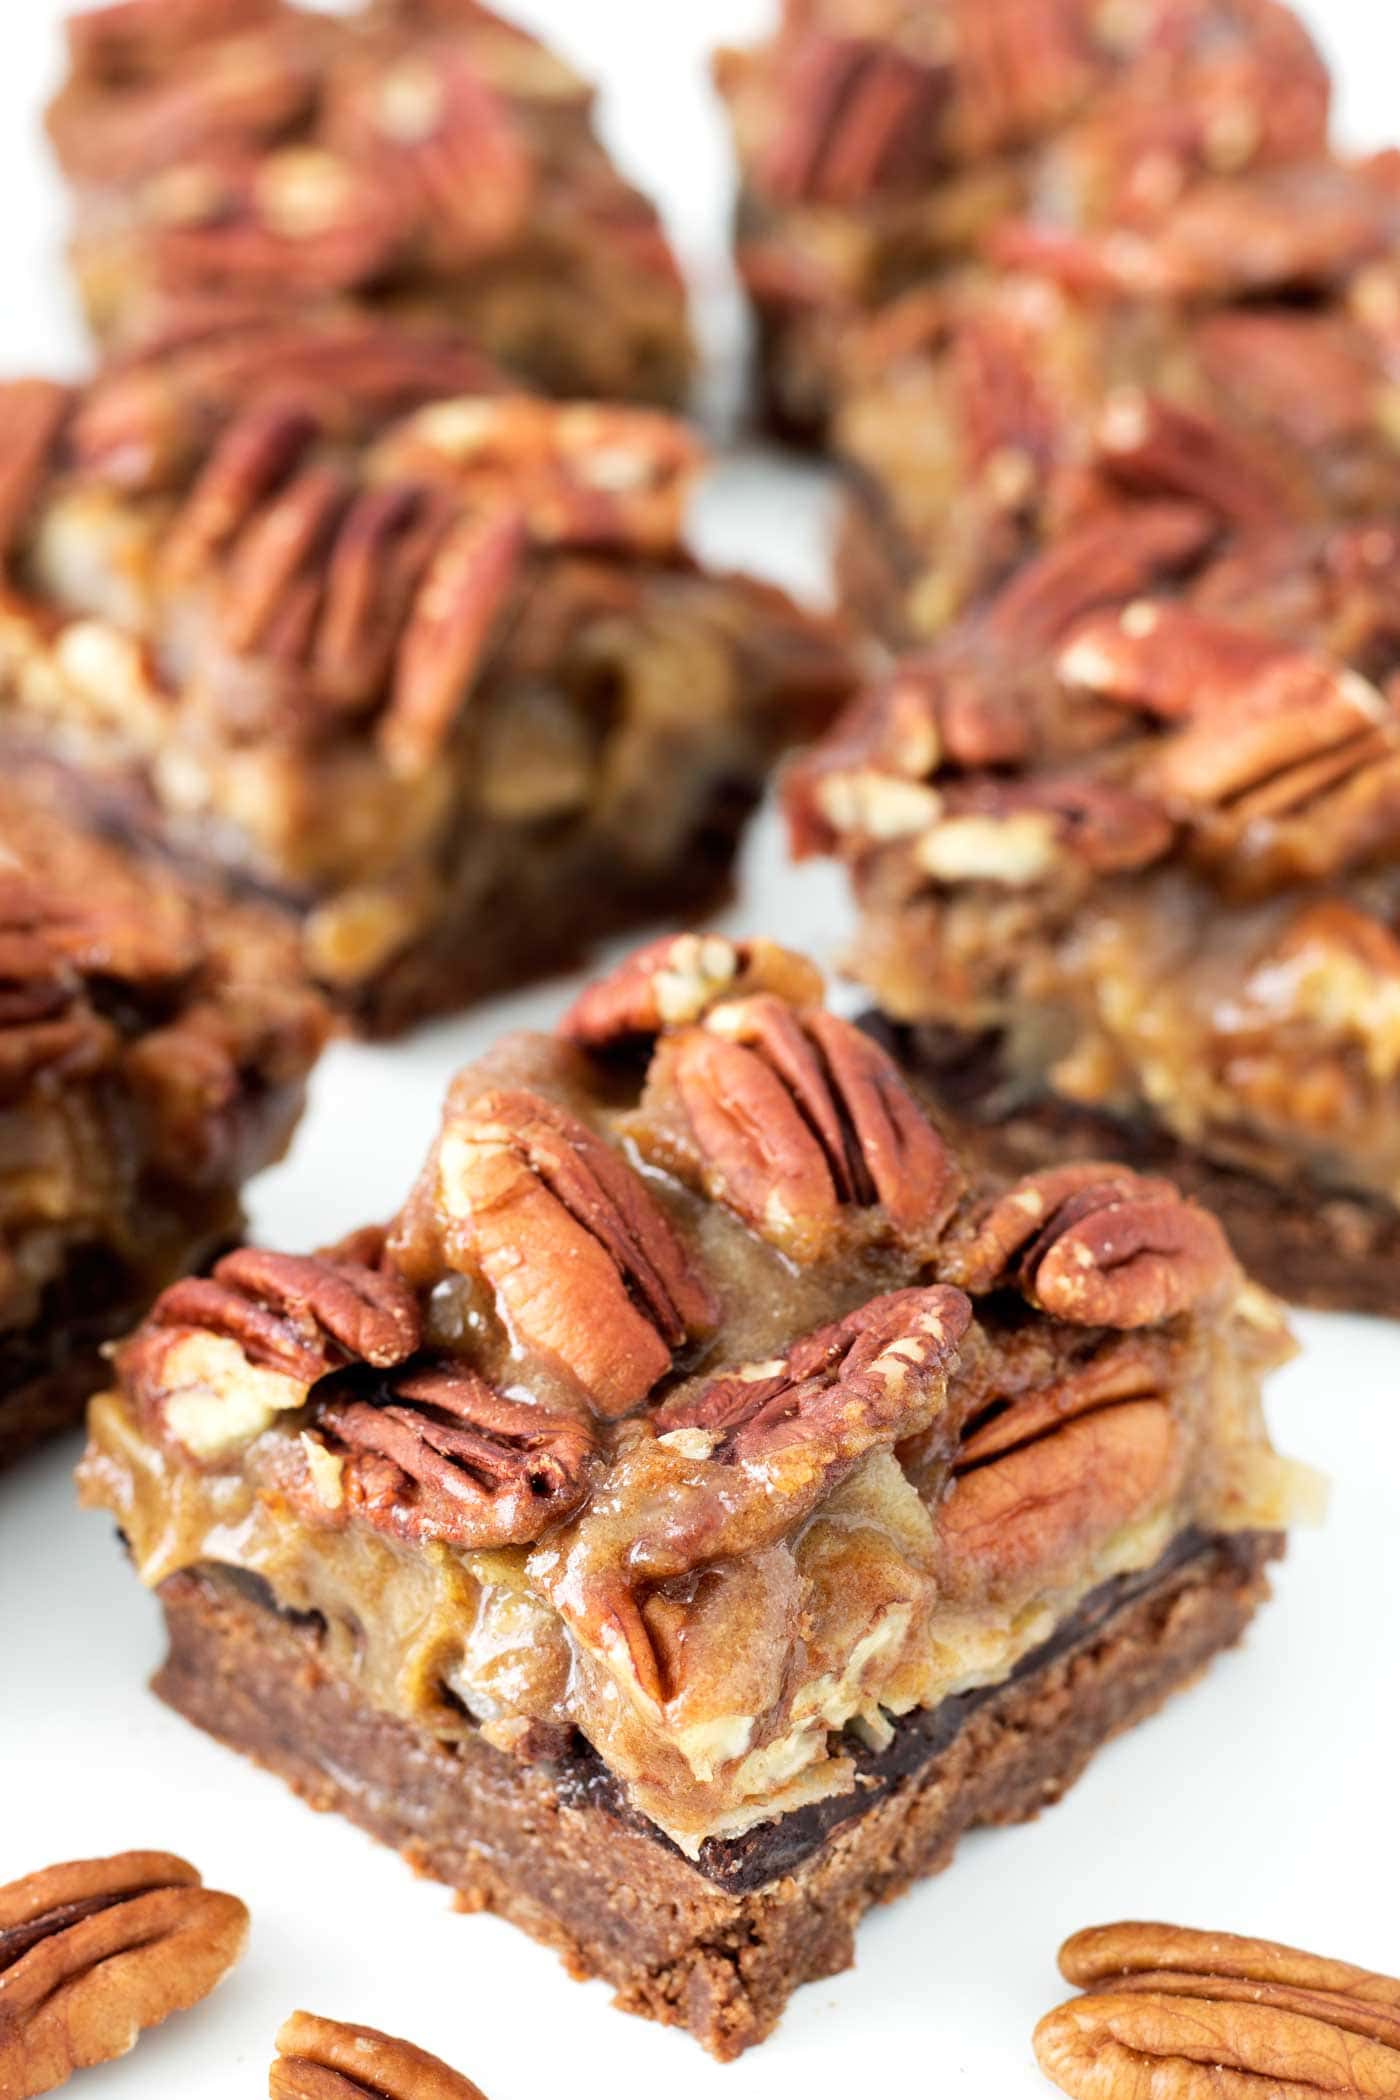 Pecan pie meets German chocolate cake! This healthy holiday dessert is perfect for Thanksgiving or Christmas. Paleo, gluten free, and dairy free!